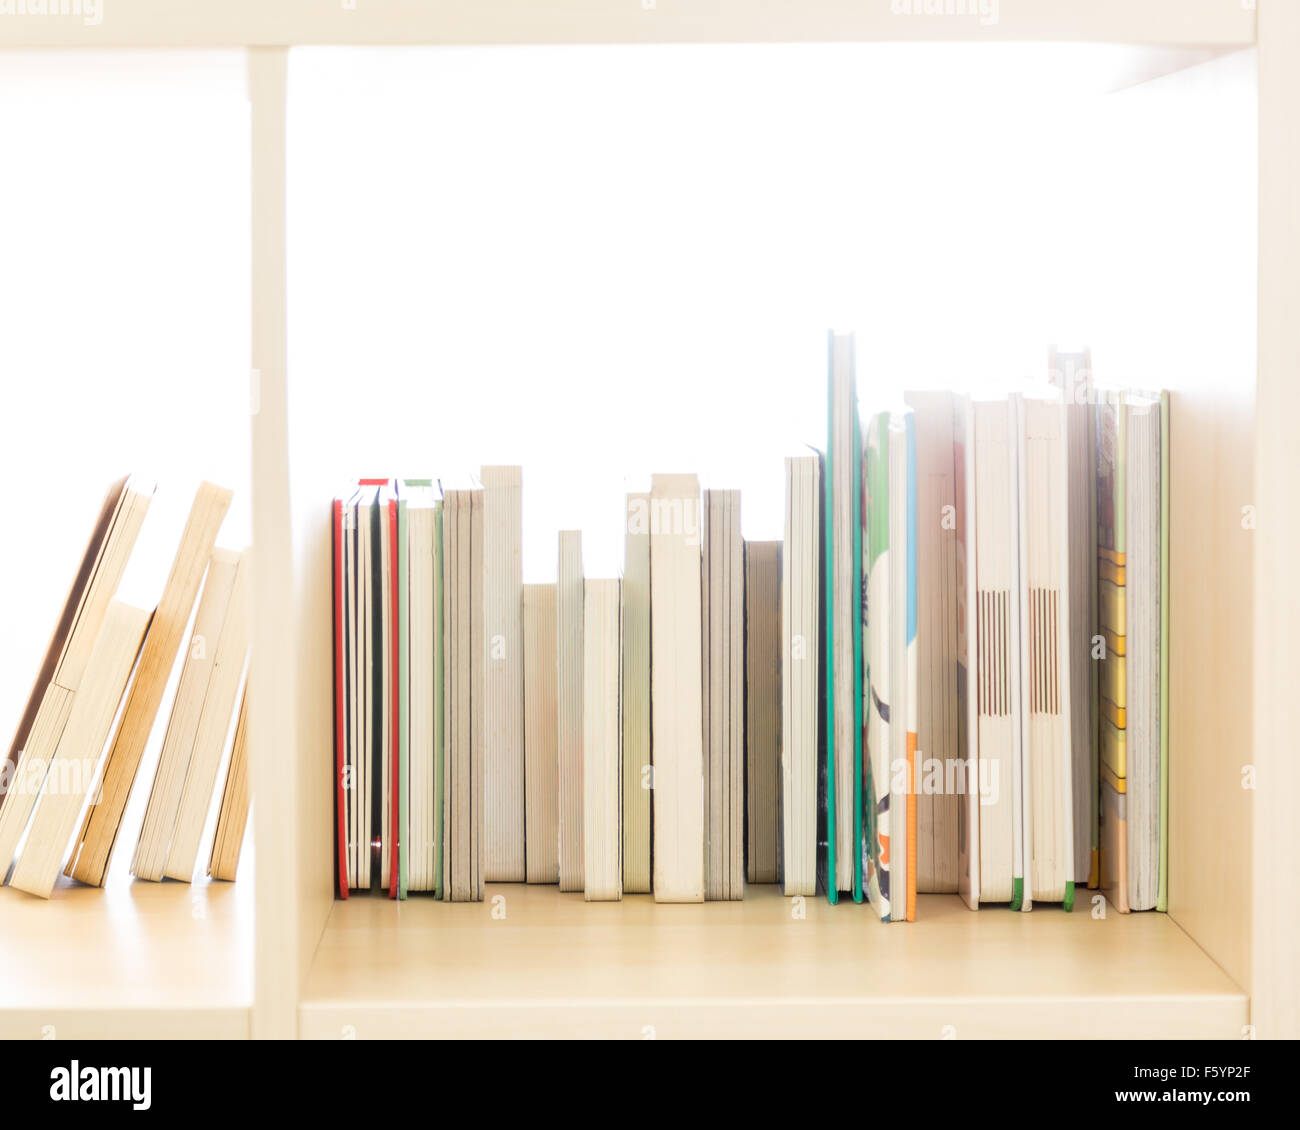 Row of books in a wooden bookcase Stock Photo